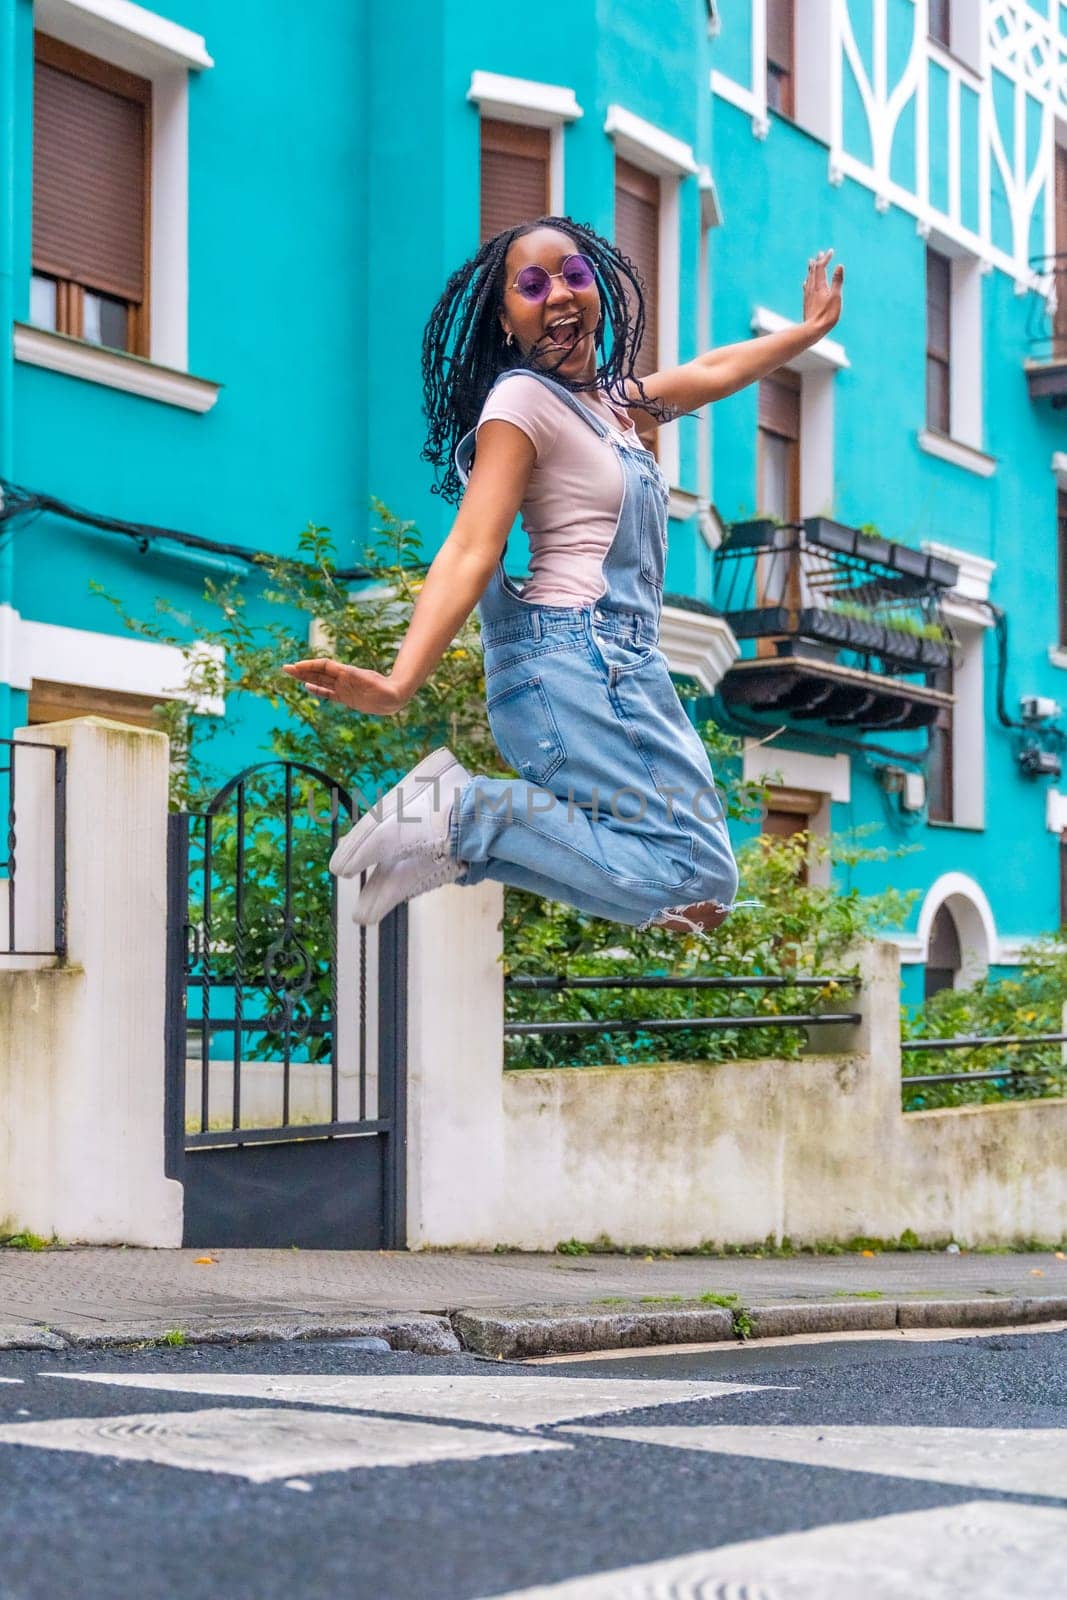 Vertical photo of an african young woman jumping in a street with colorful houses